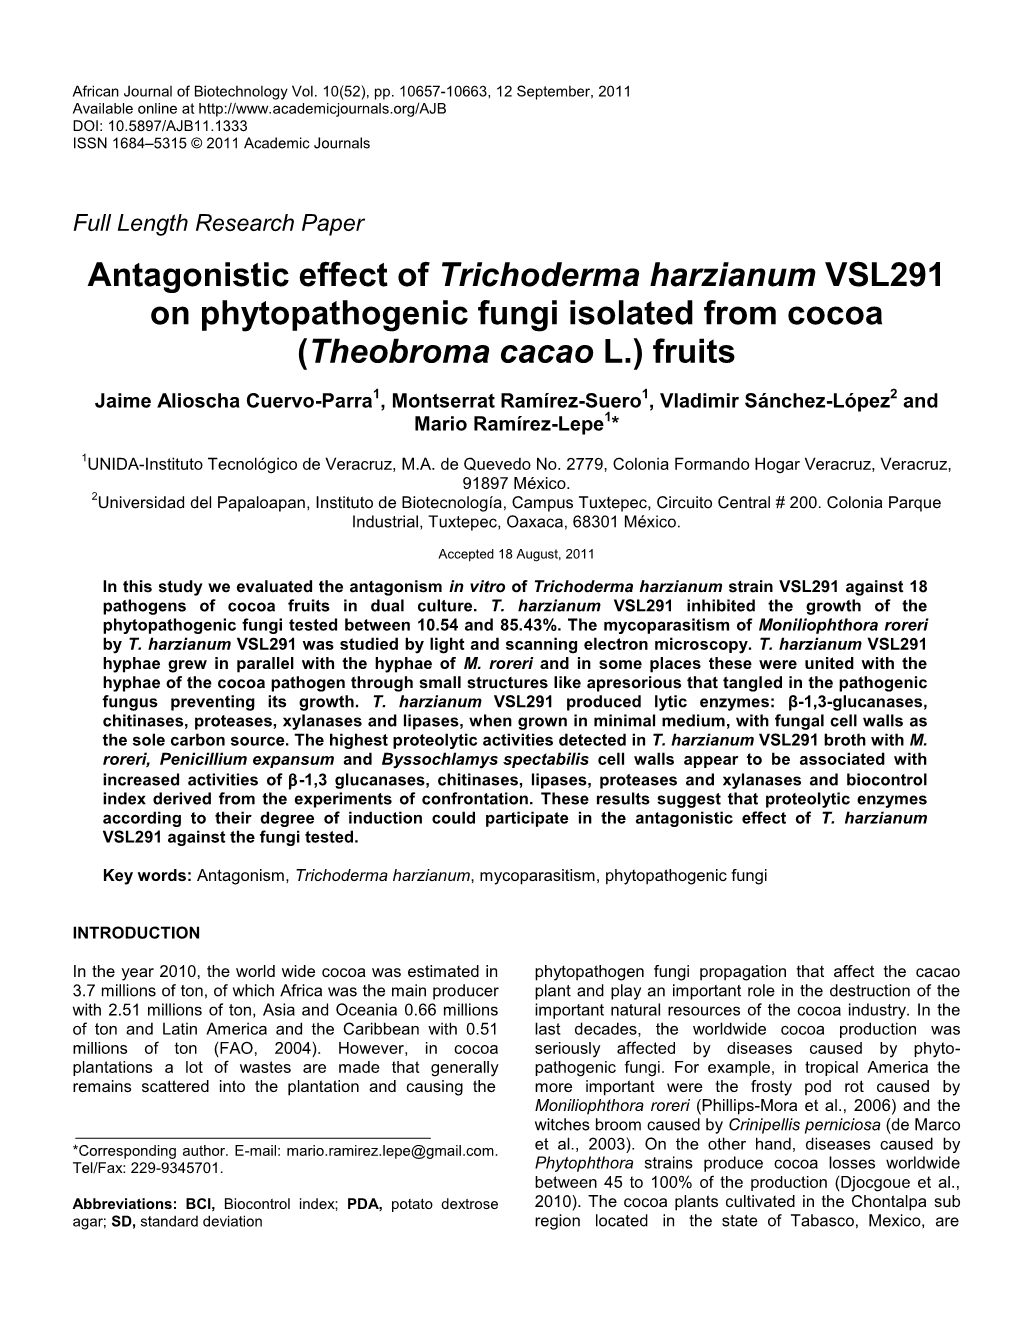 Antagonistic Effect of Trichoderma Harzianum VSL291 on Phytopathogenic Fungi Isolated from Cocoa (Theobroma Cacao L.) Fruits